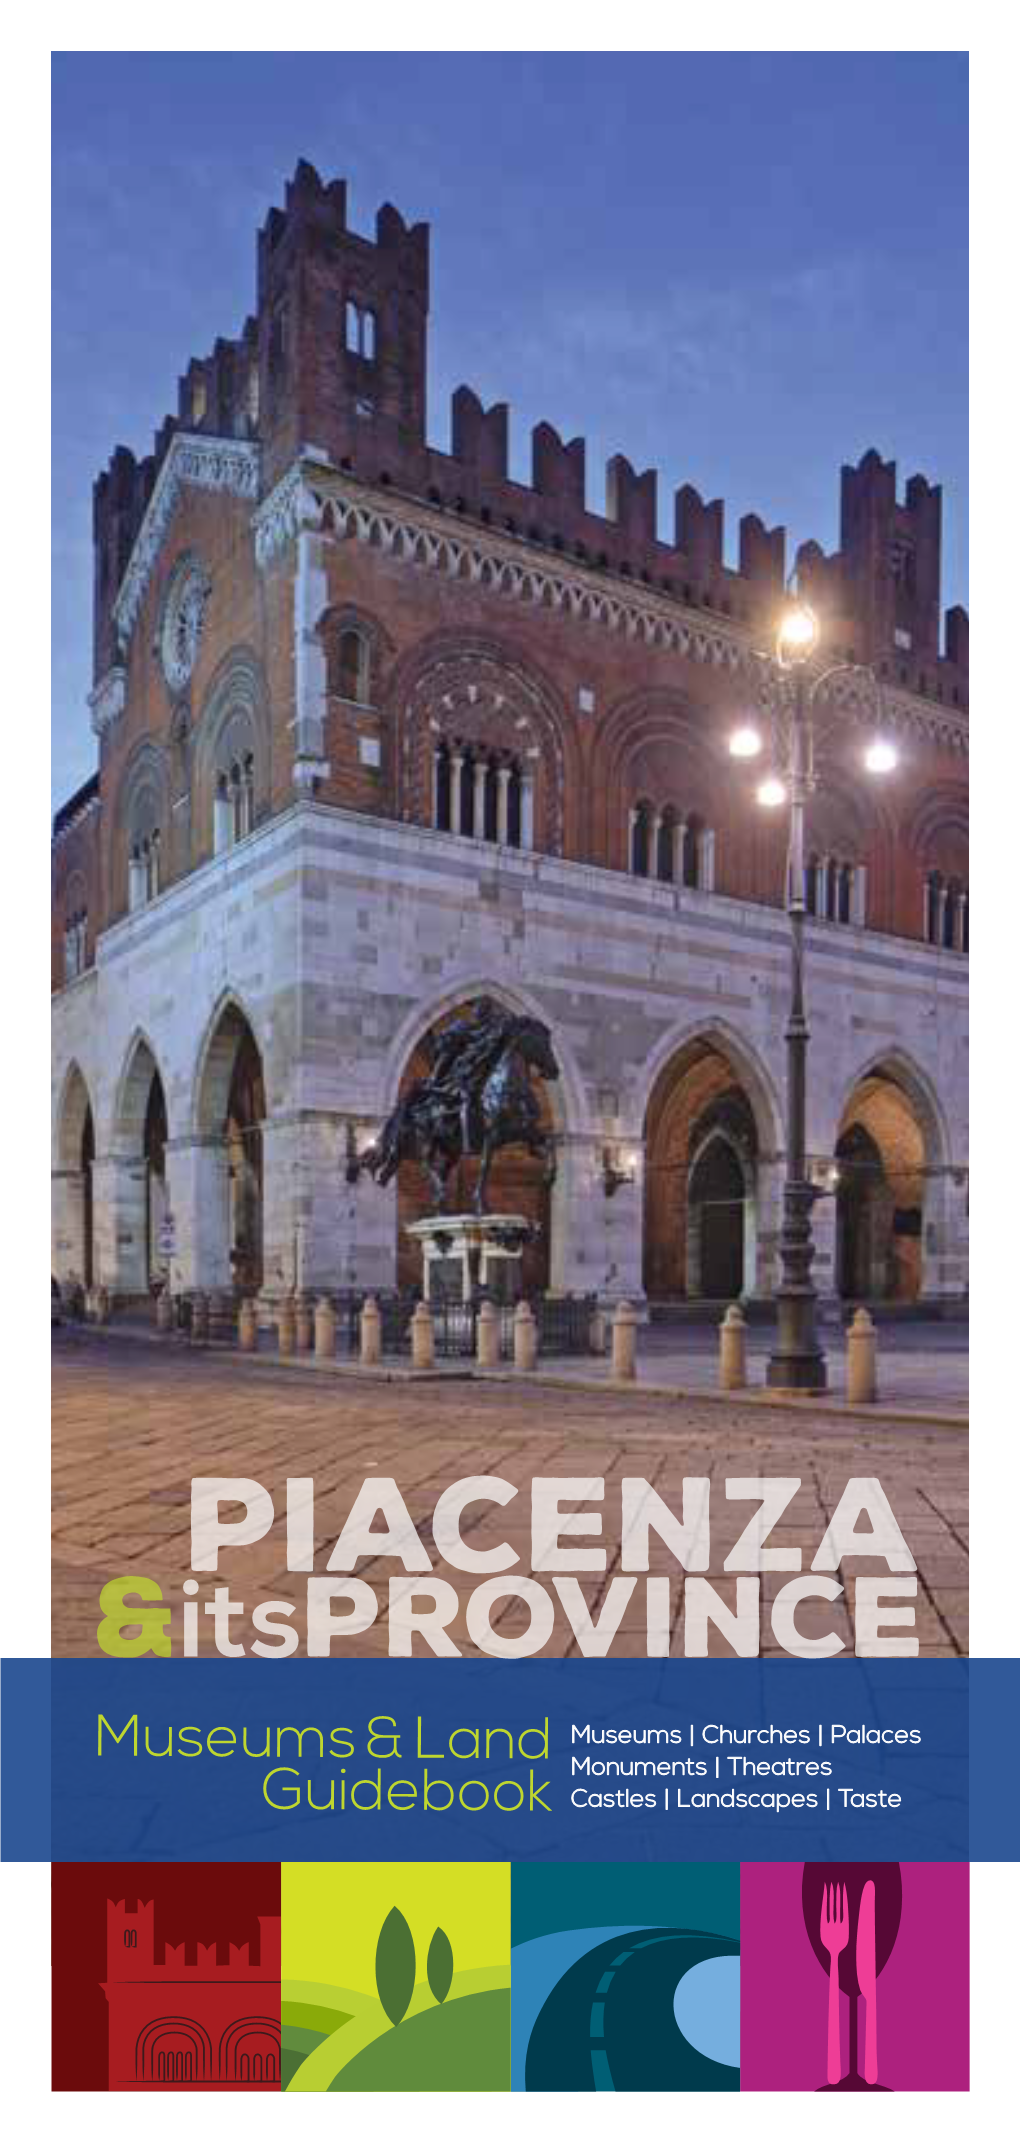 Piacenza Musei, Because of Two Important Contexts: the 20Th Anniversary of Our Association and the Extraordinary Event of EXPO Milan 2015